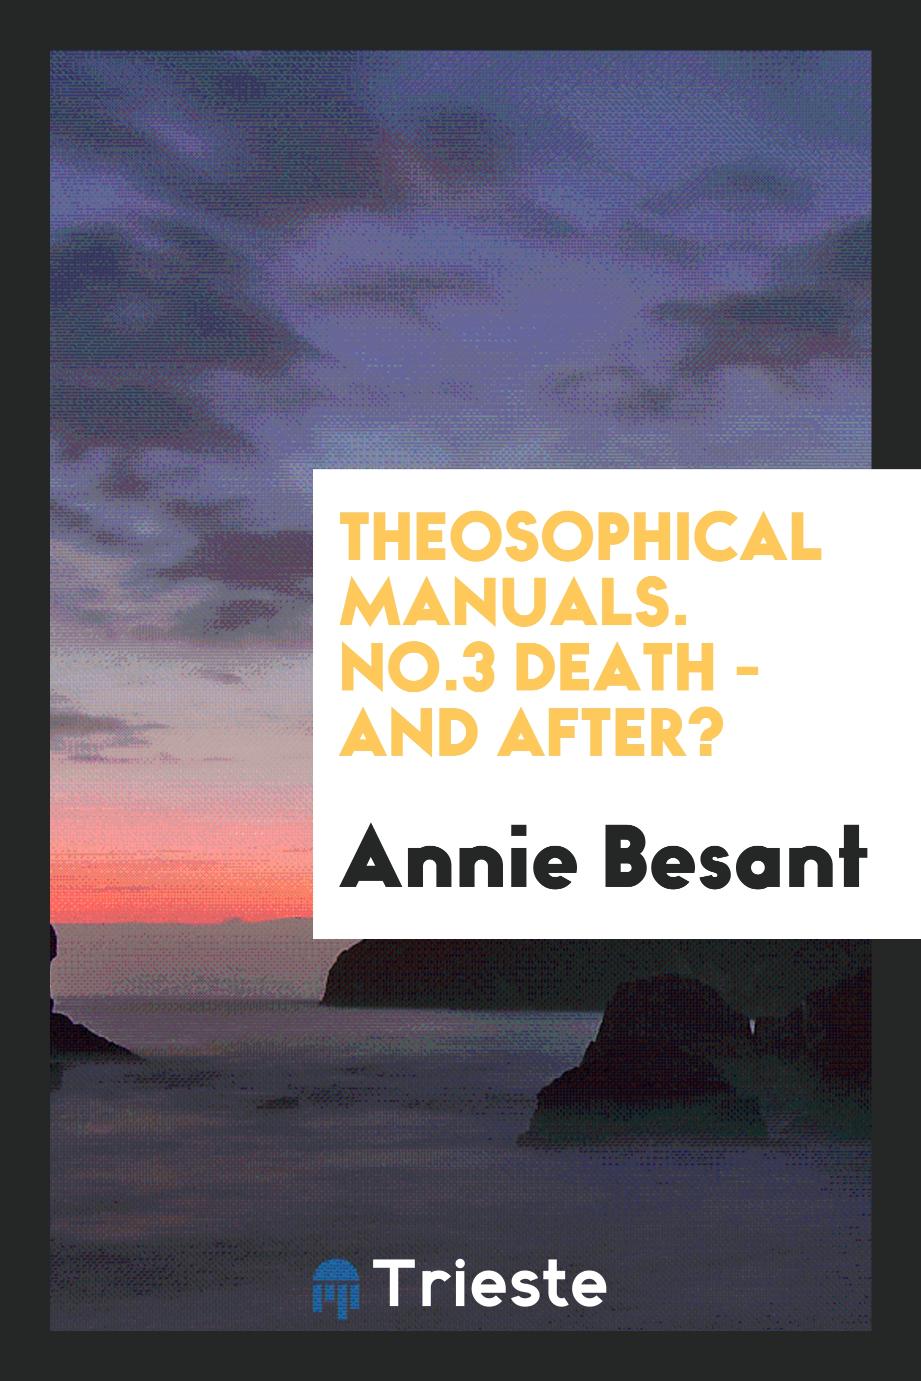 Theosophical Manuals. No.3 Death - and After?